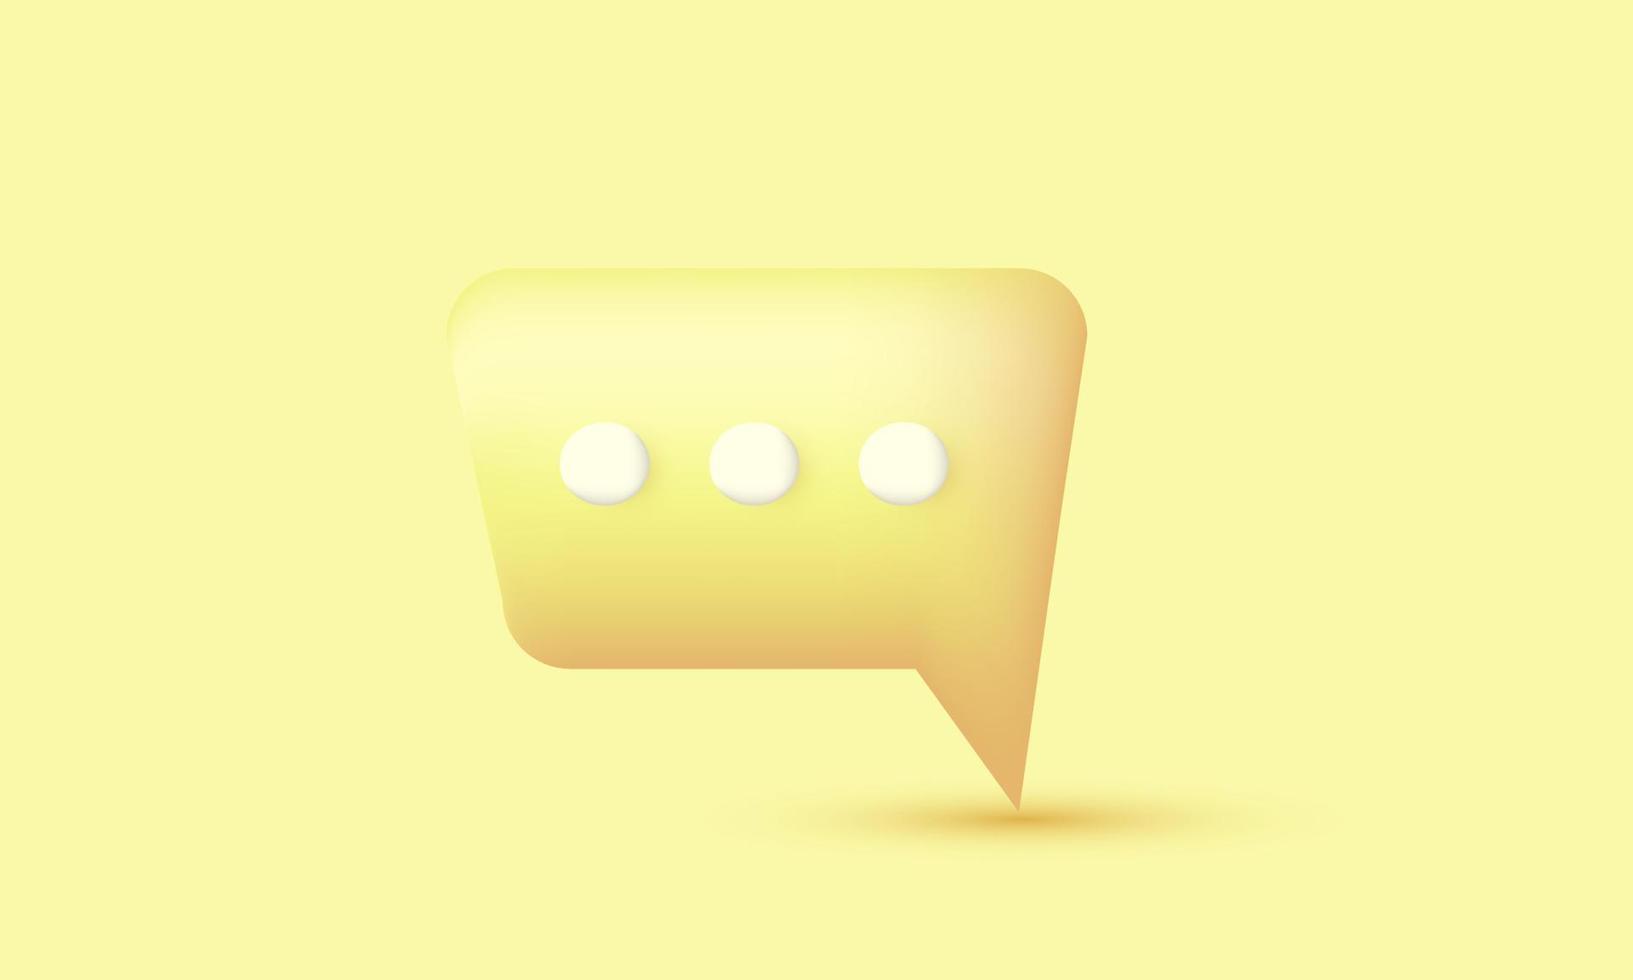 illustration realistic icon yellow speech bubbles messenge modern style 3d creative isolated on background vector